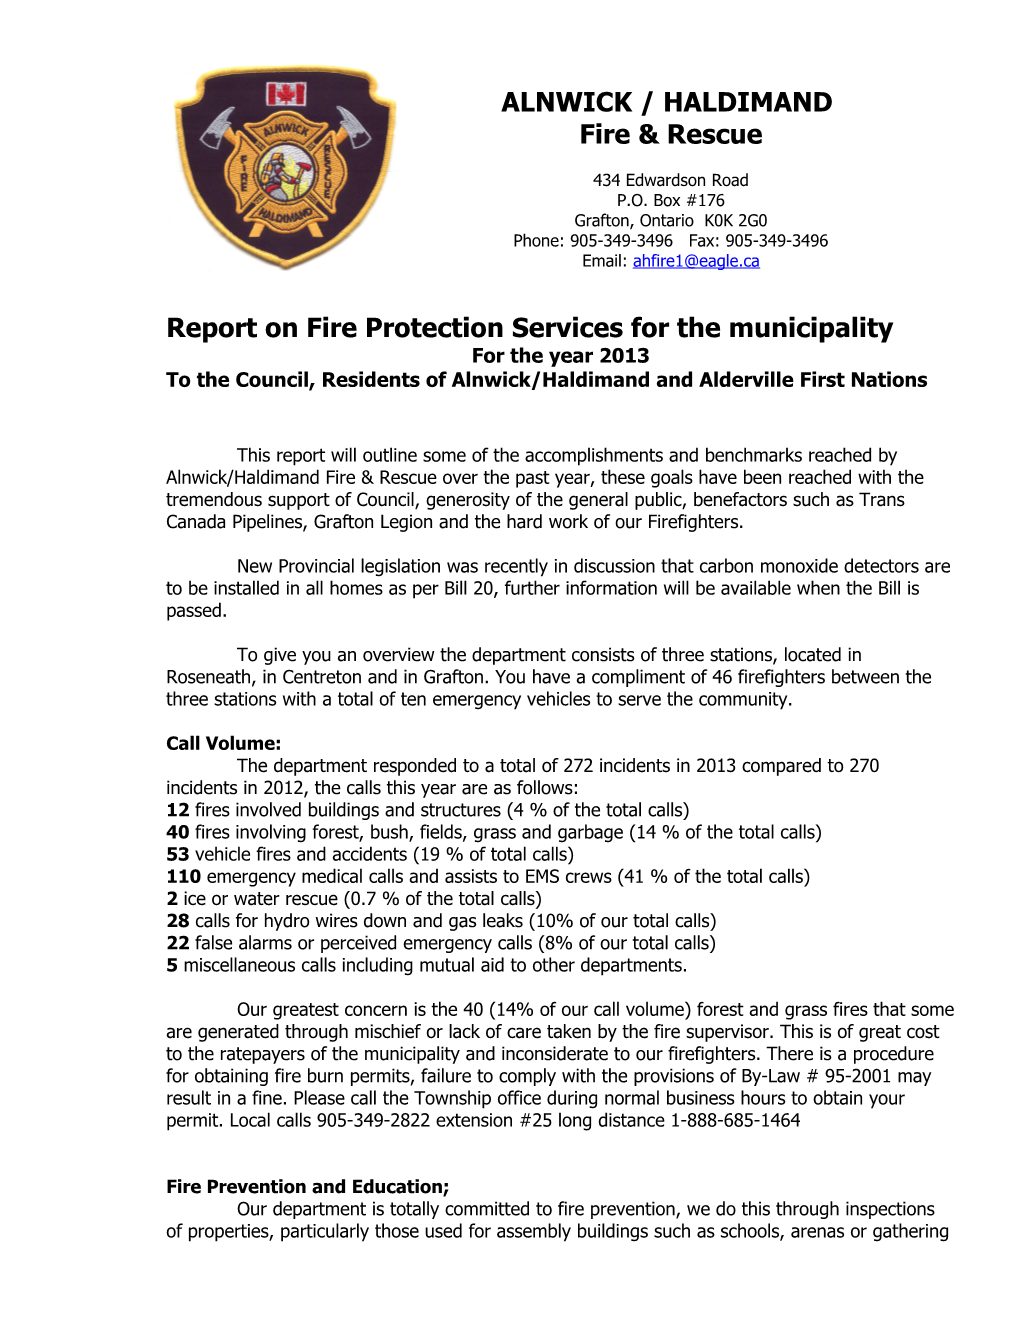 Report on Fire Protection Services for the Municipality